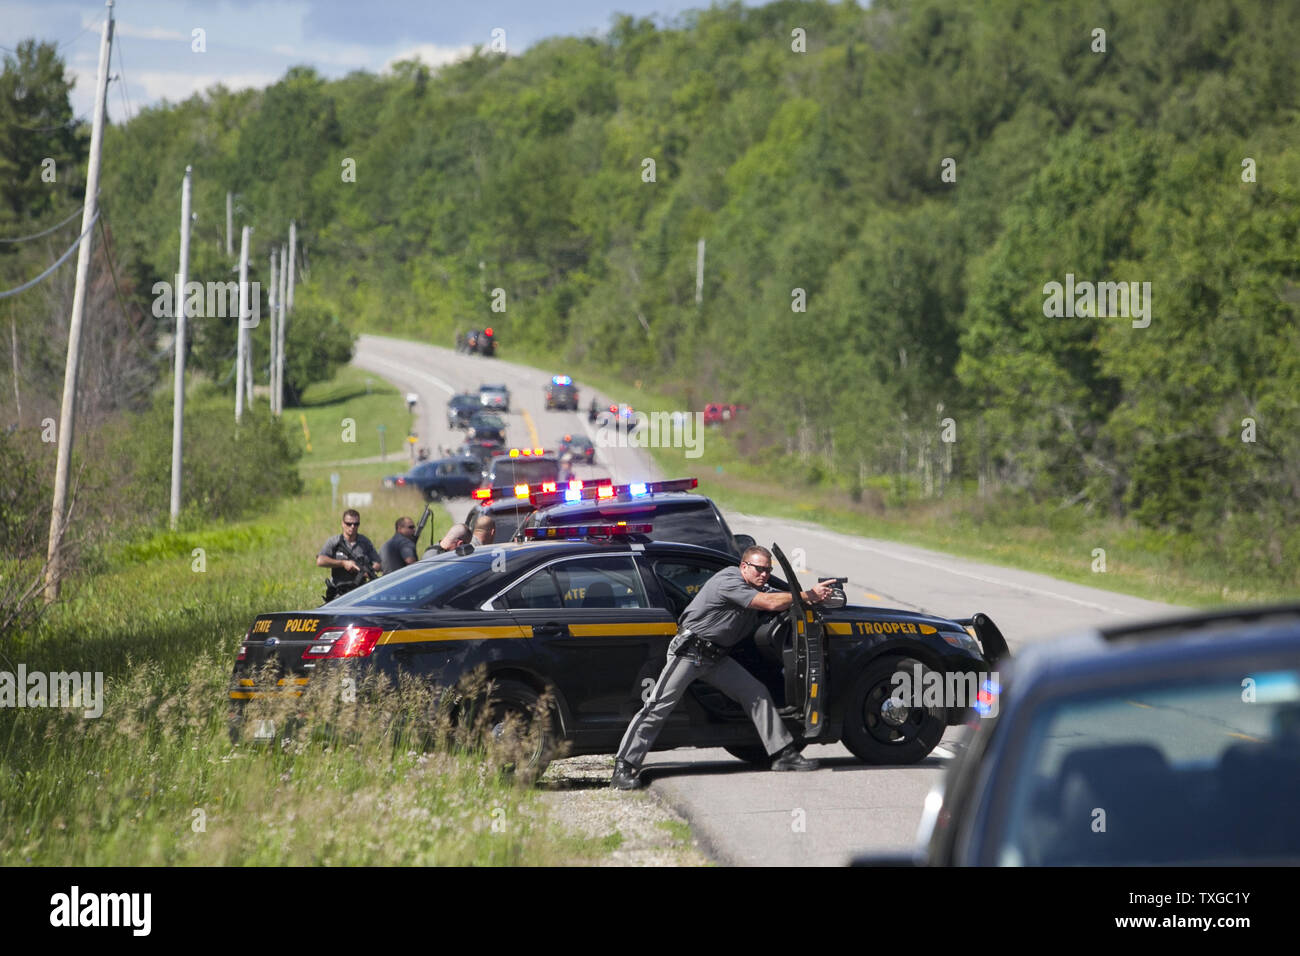 Law enforcement personnel take cover after cornering two escaped prisoners off of Route 30 in Malone, New York on June 26, 2015.  At least one prisoner, Richard Matt, is believed to have been shot dead by law enforcement and second prisoner, David Sweat, may still be on the loose.   Photo by Matthew Healey/UPI Stock Photo